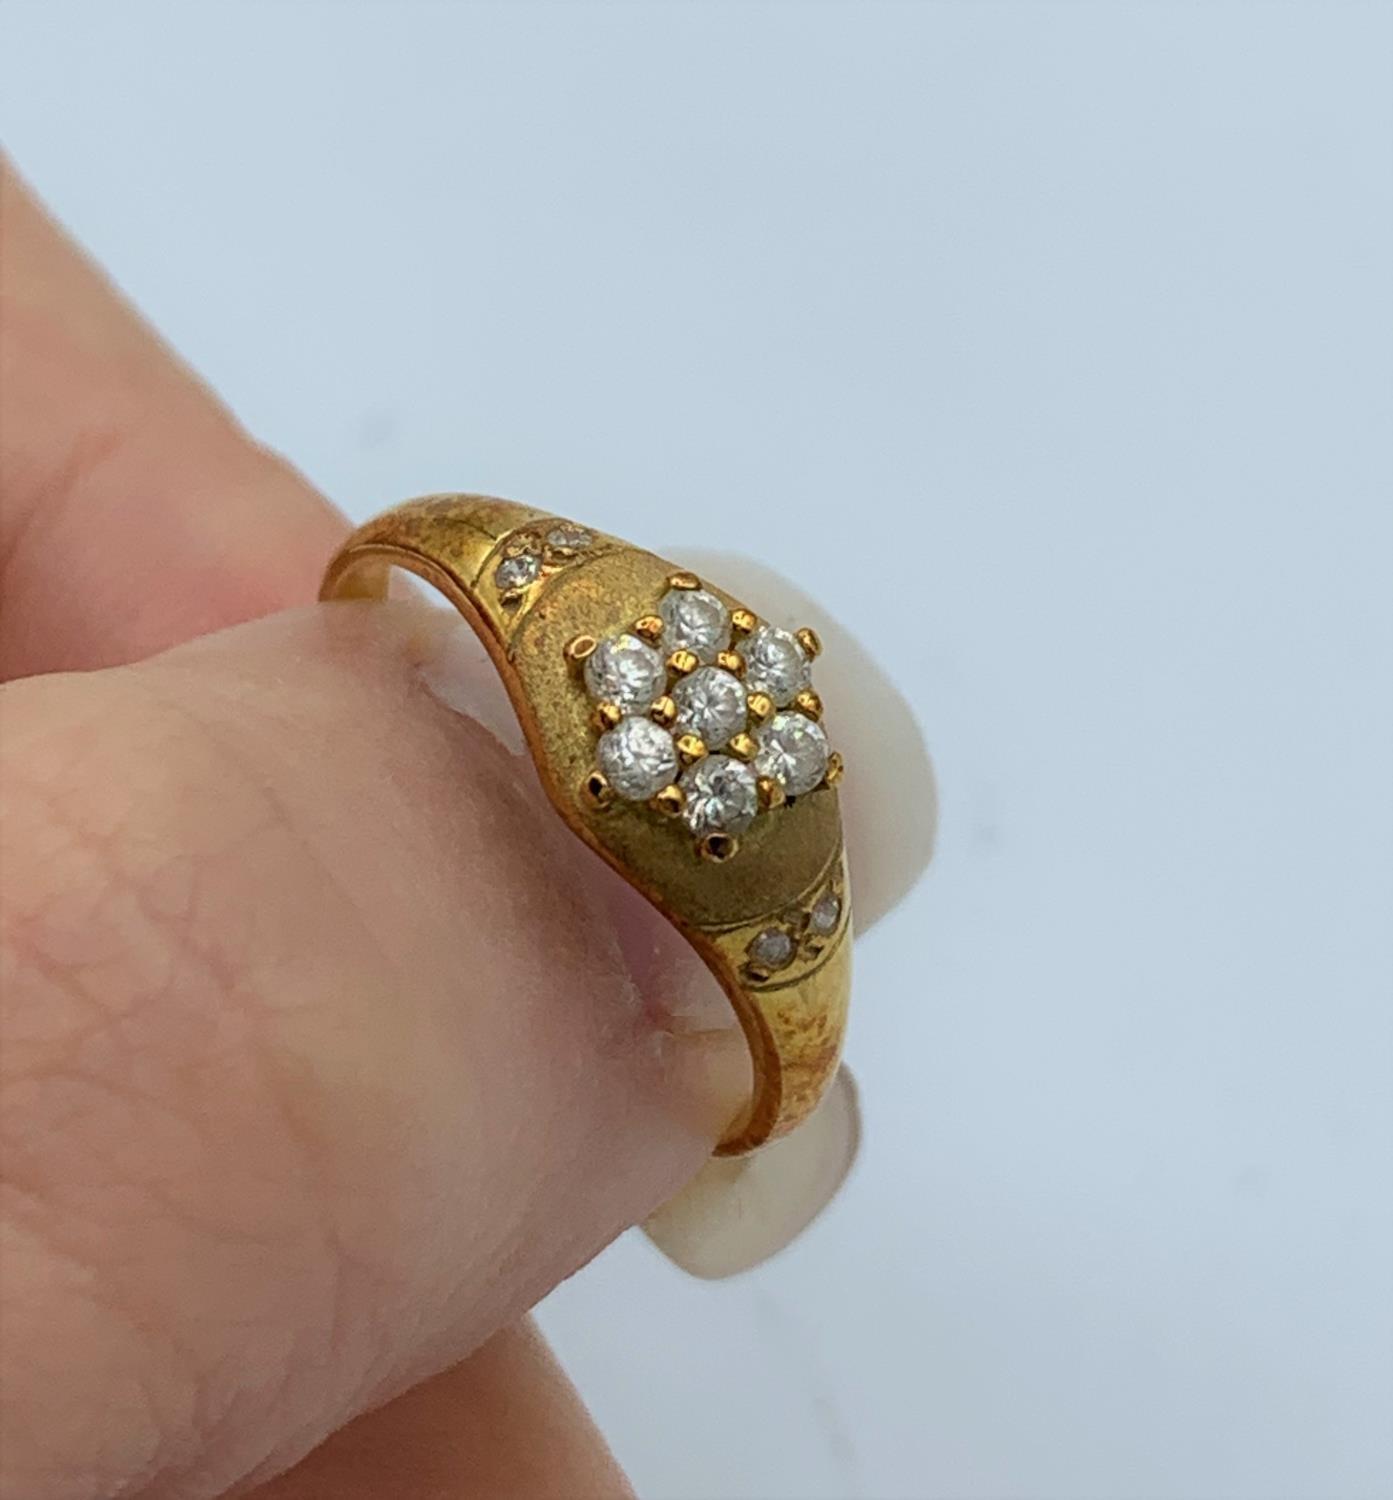 Yellow metal vintage ring with 7 diamonds forming a flower